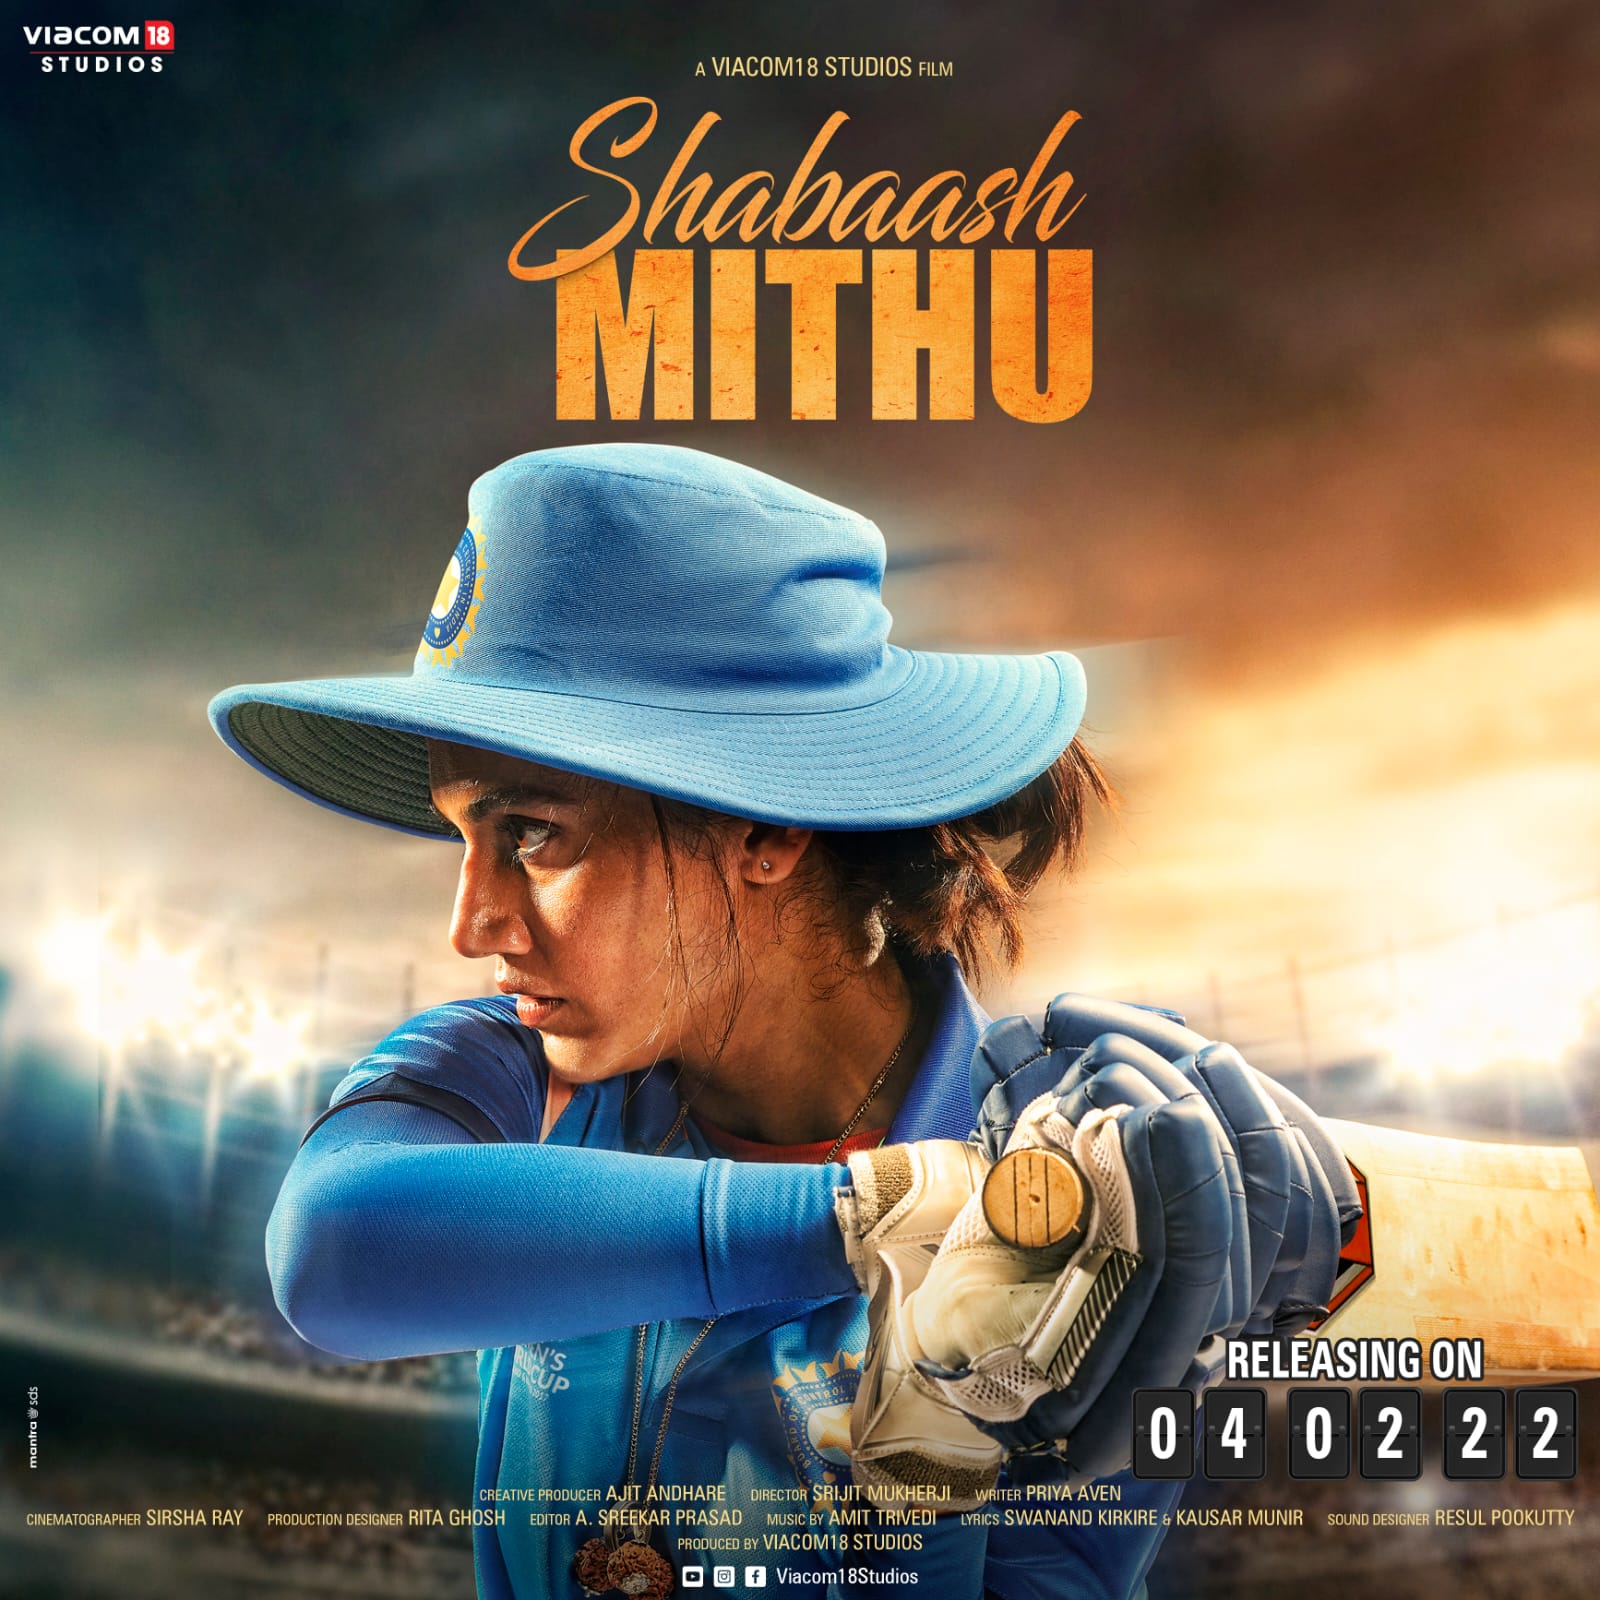 Shabaash Mithu to in theatres worldwide on 4th Feb, 2022